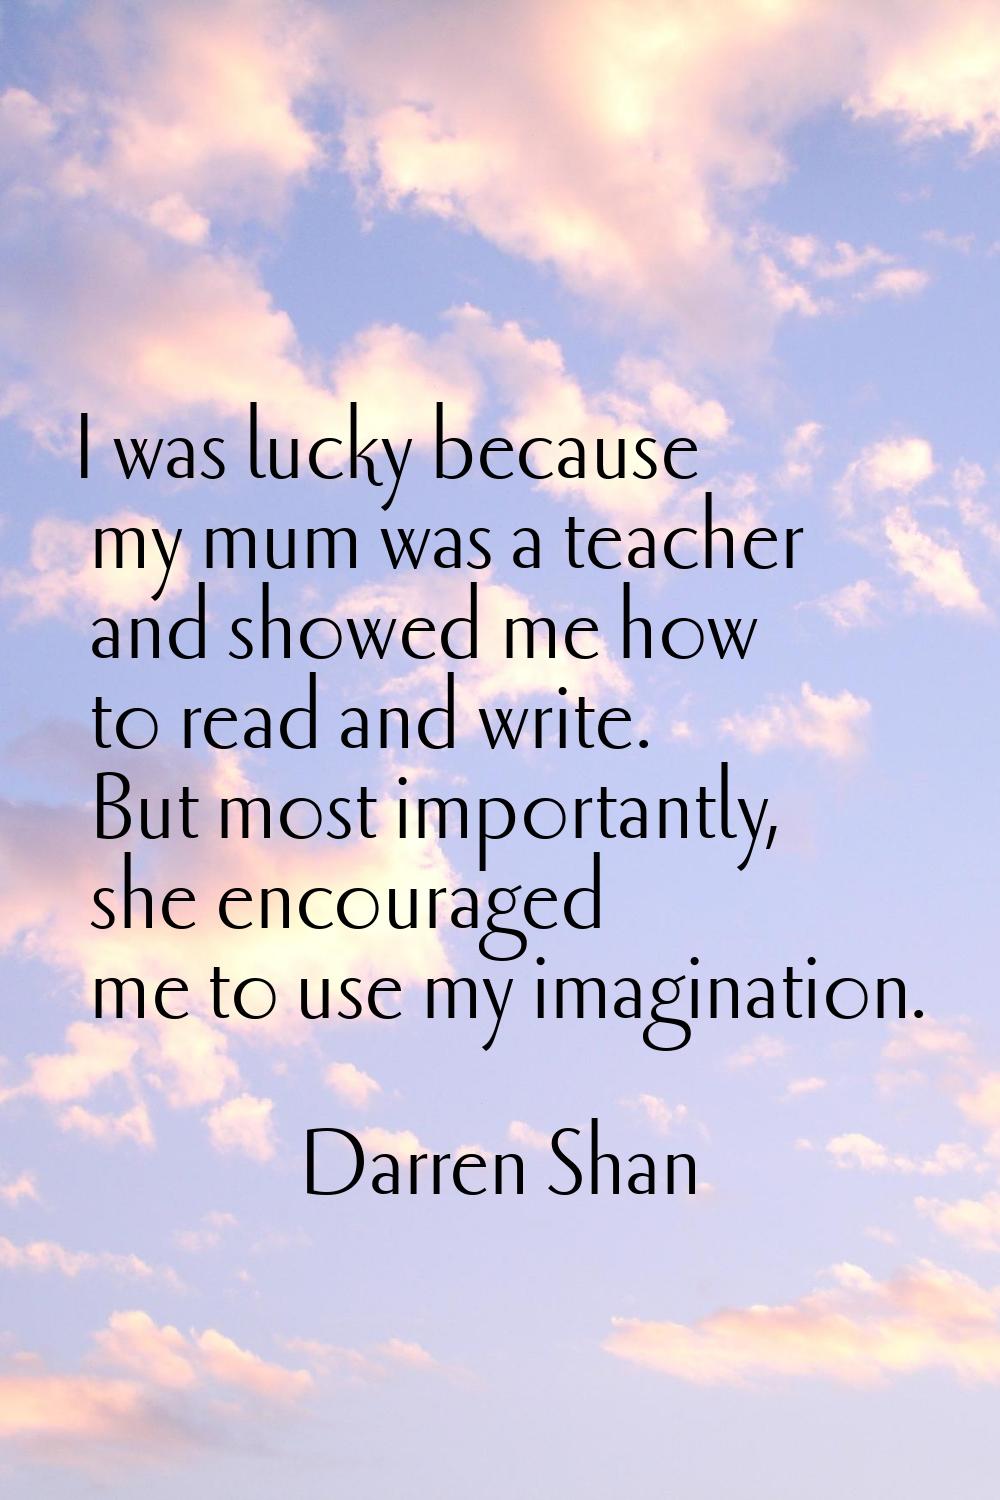 I was lucky because my mum was a teacher and showed me how to read and write. But most importantly,